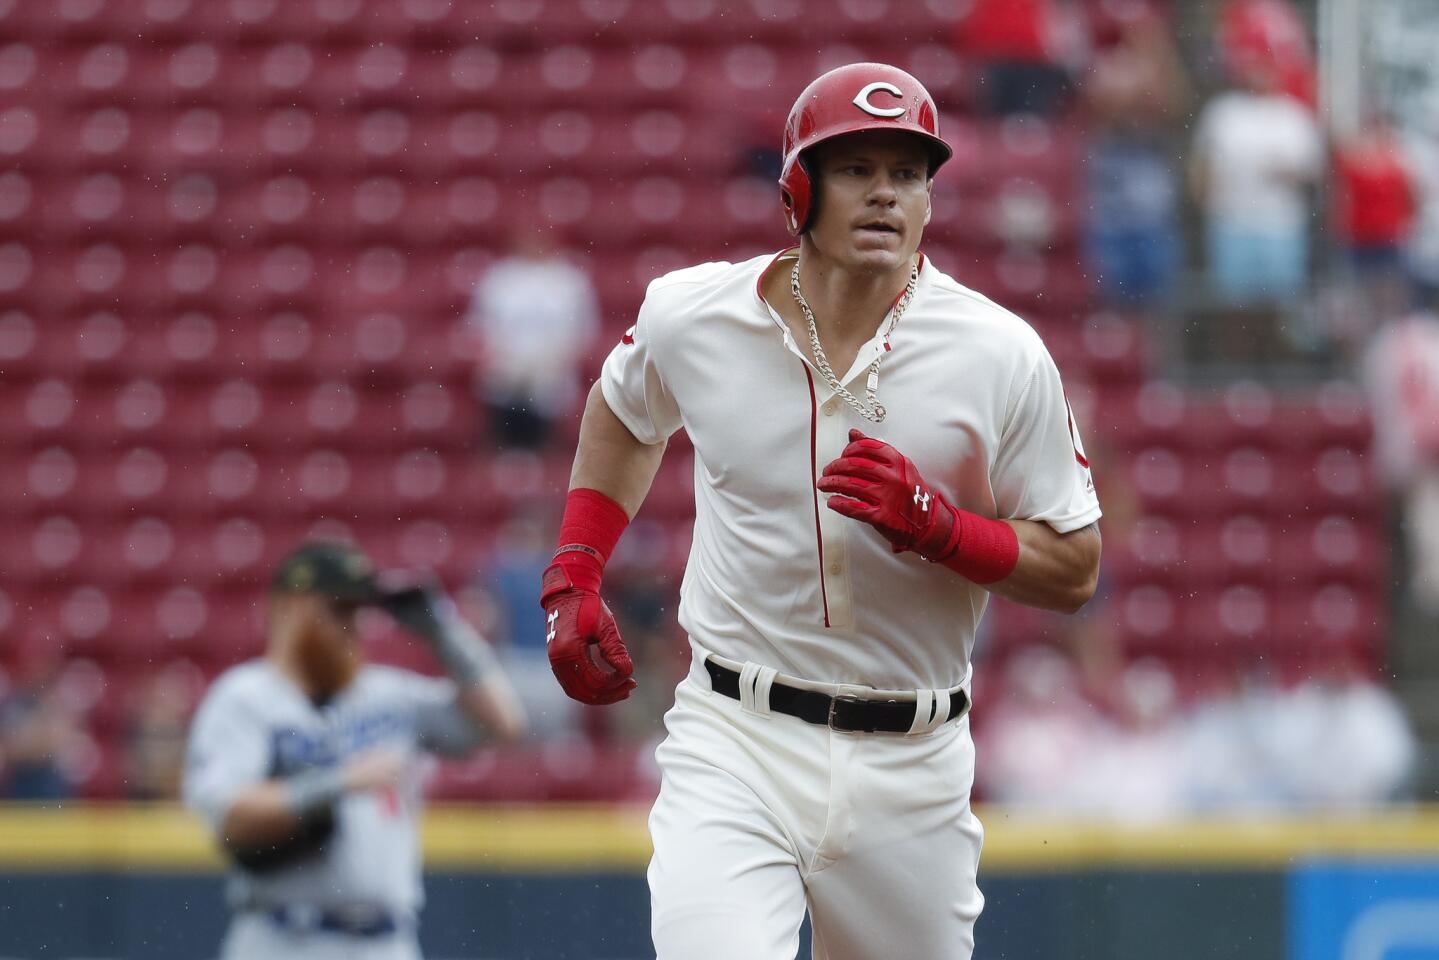 Cincinnati Reds' Derek Dietrich runs the bases after hitting a solo home run off Los Angeles Dodgers relief pitcher Yimi Garcia in the ninth inning of a baseball game, Sunday, May 19, 2019, in Cincinnati. (AP Photo/John Minchillo)